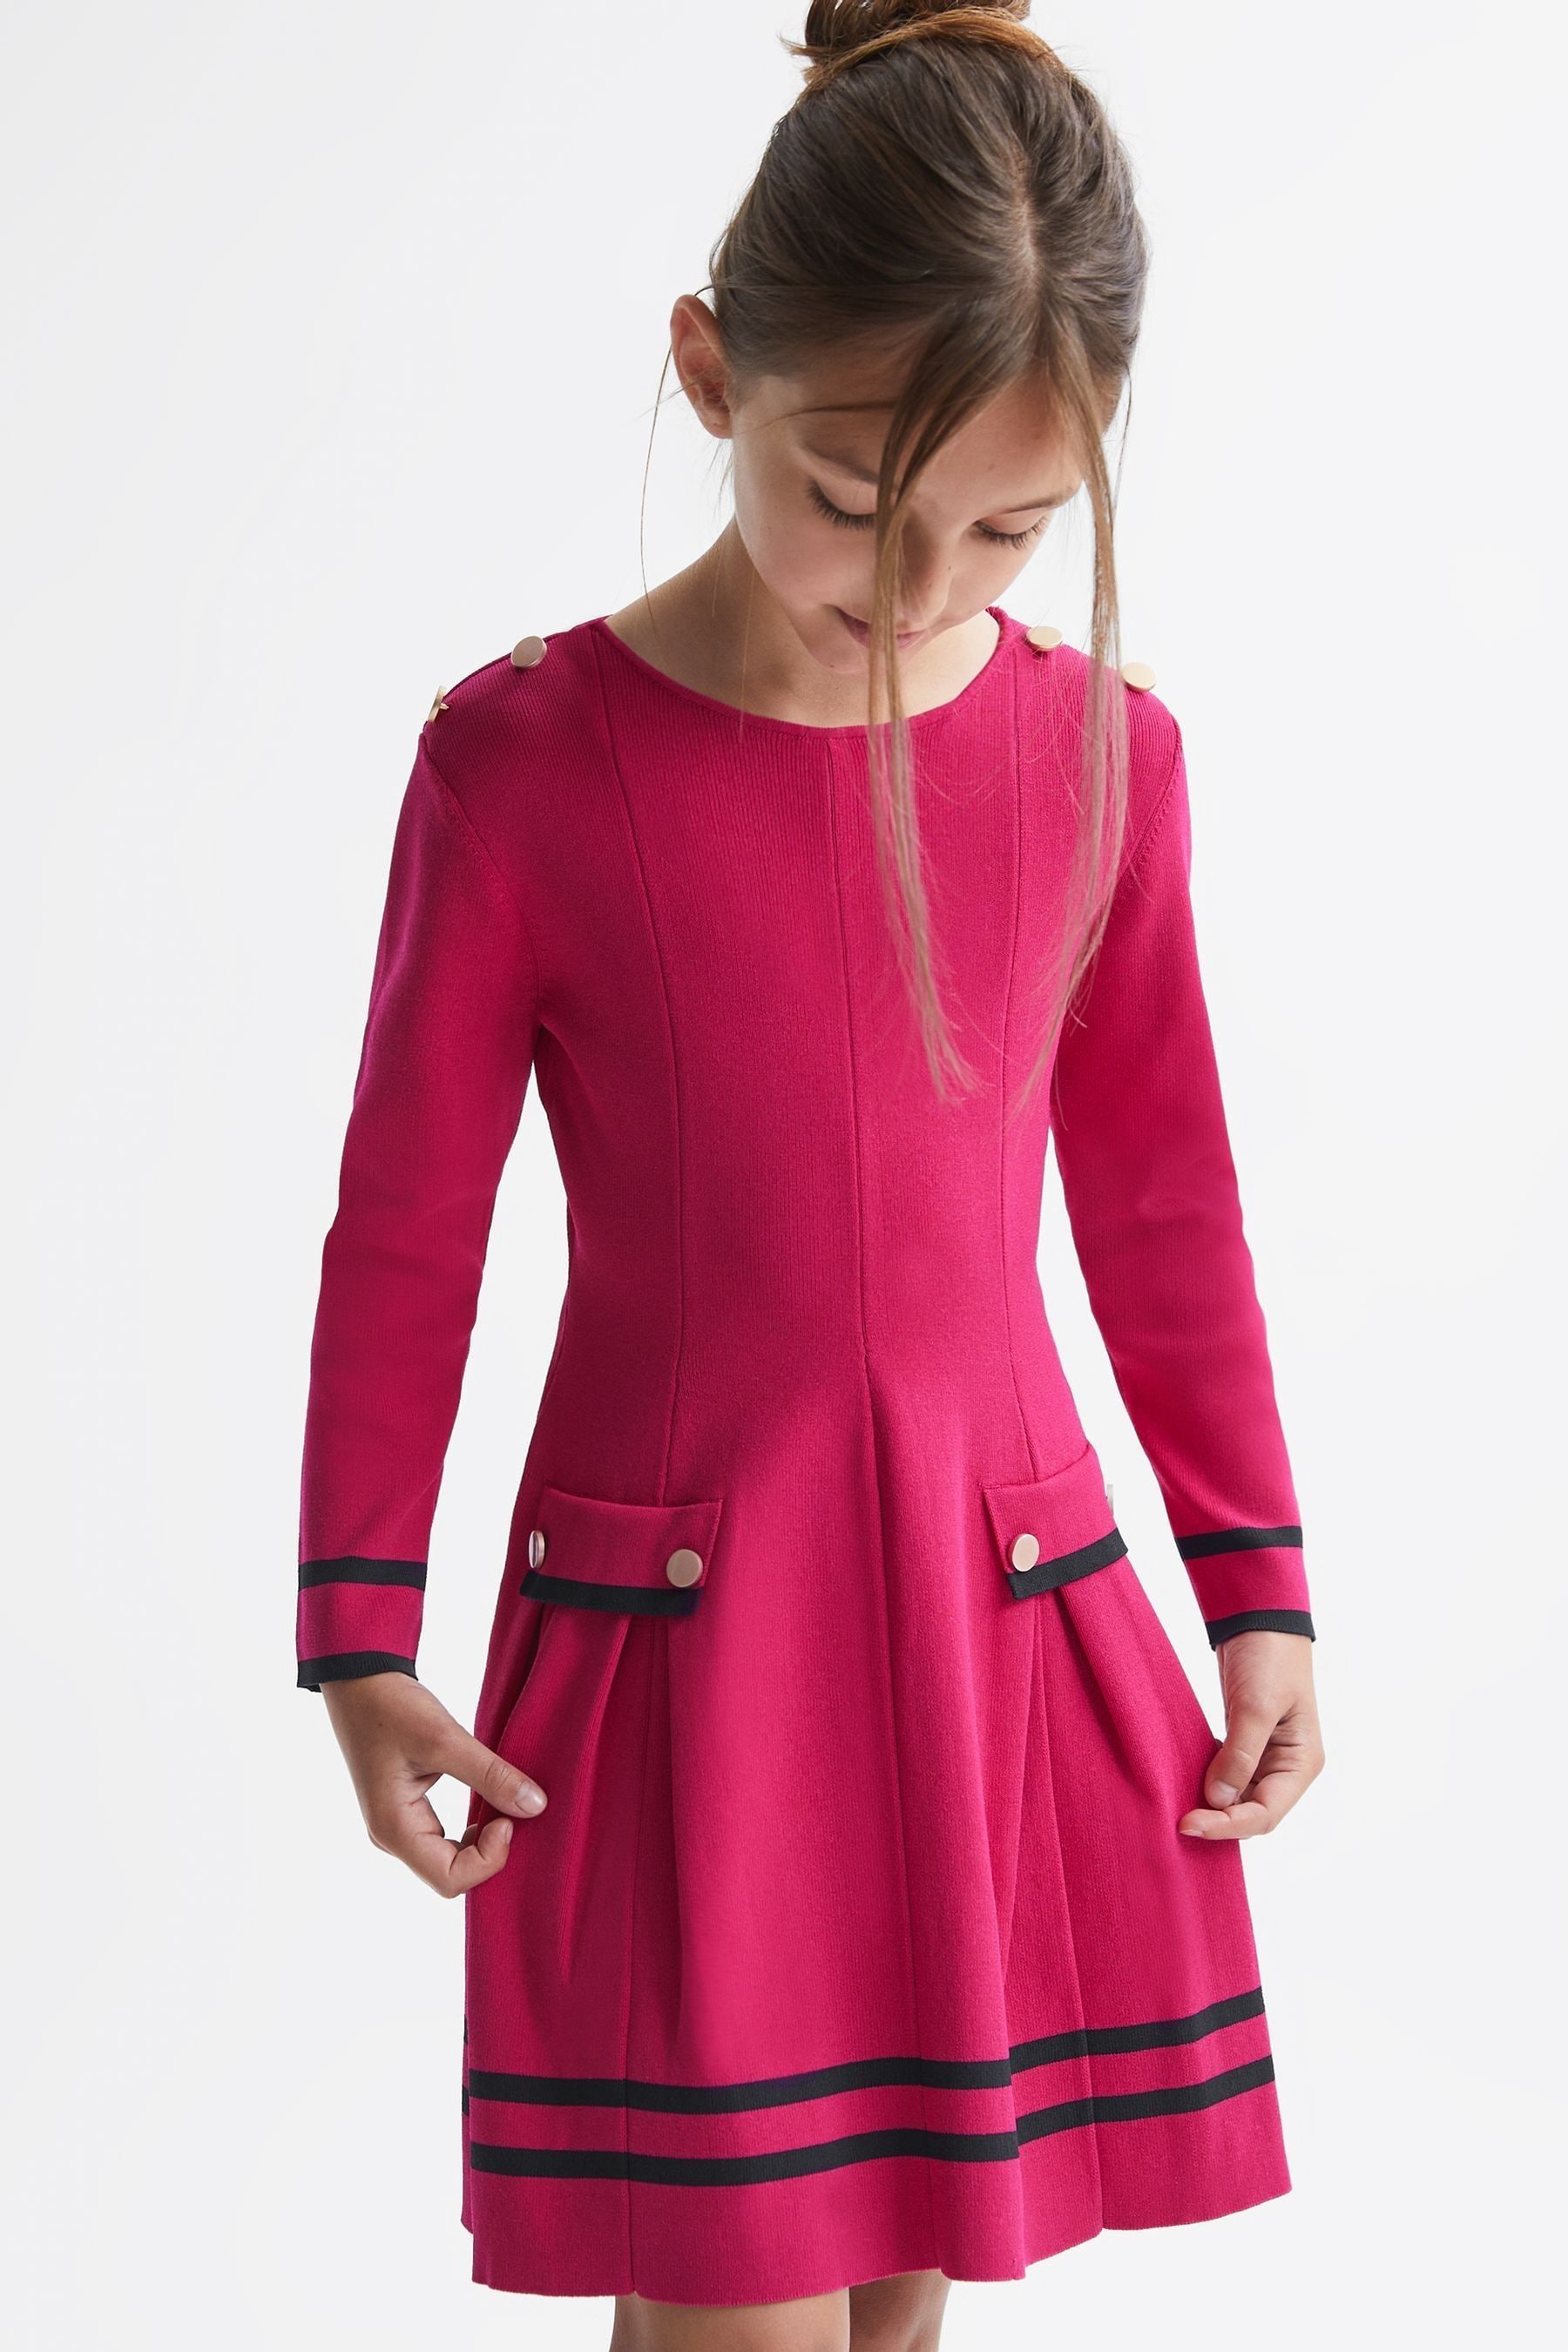 PAIGE - Knitted Flared Dress,...